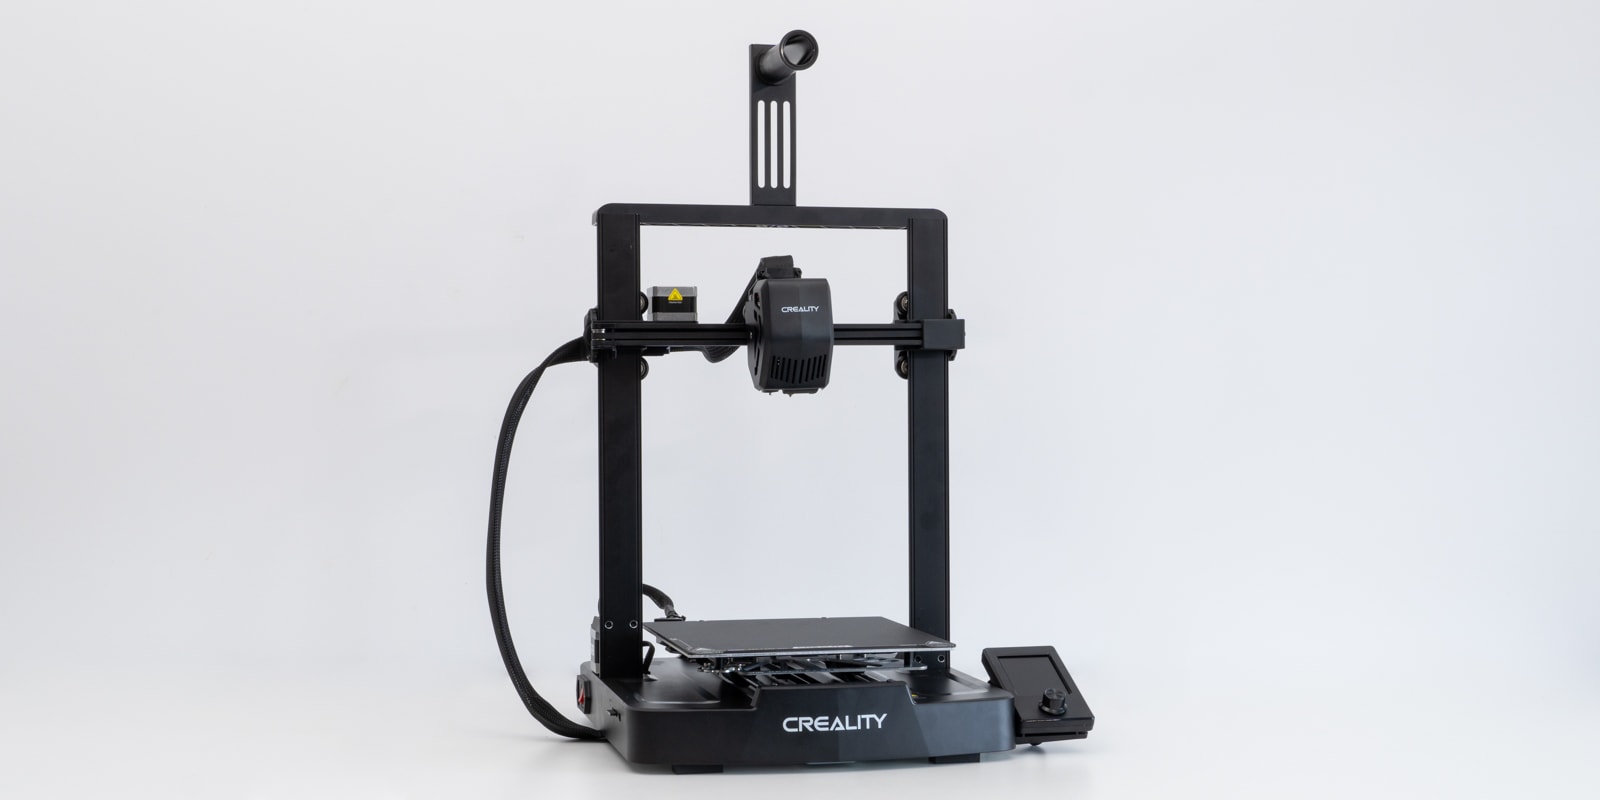 Creality Ender 3 V3 SE - Configuration and Review-Awesome Printer